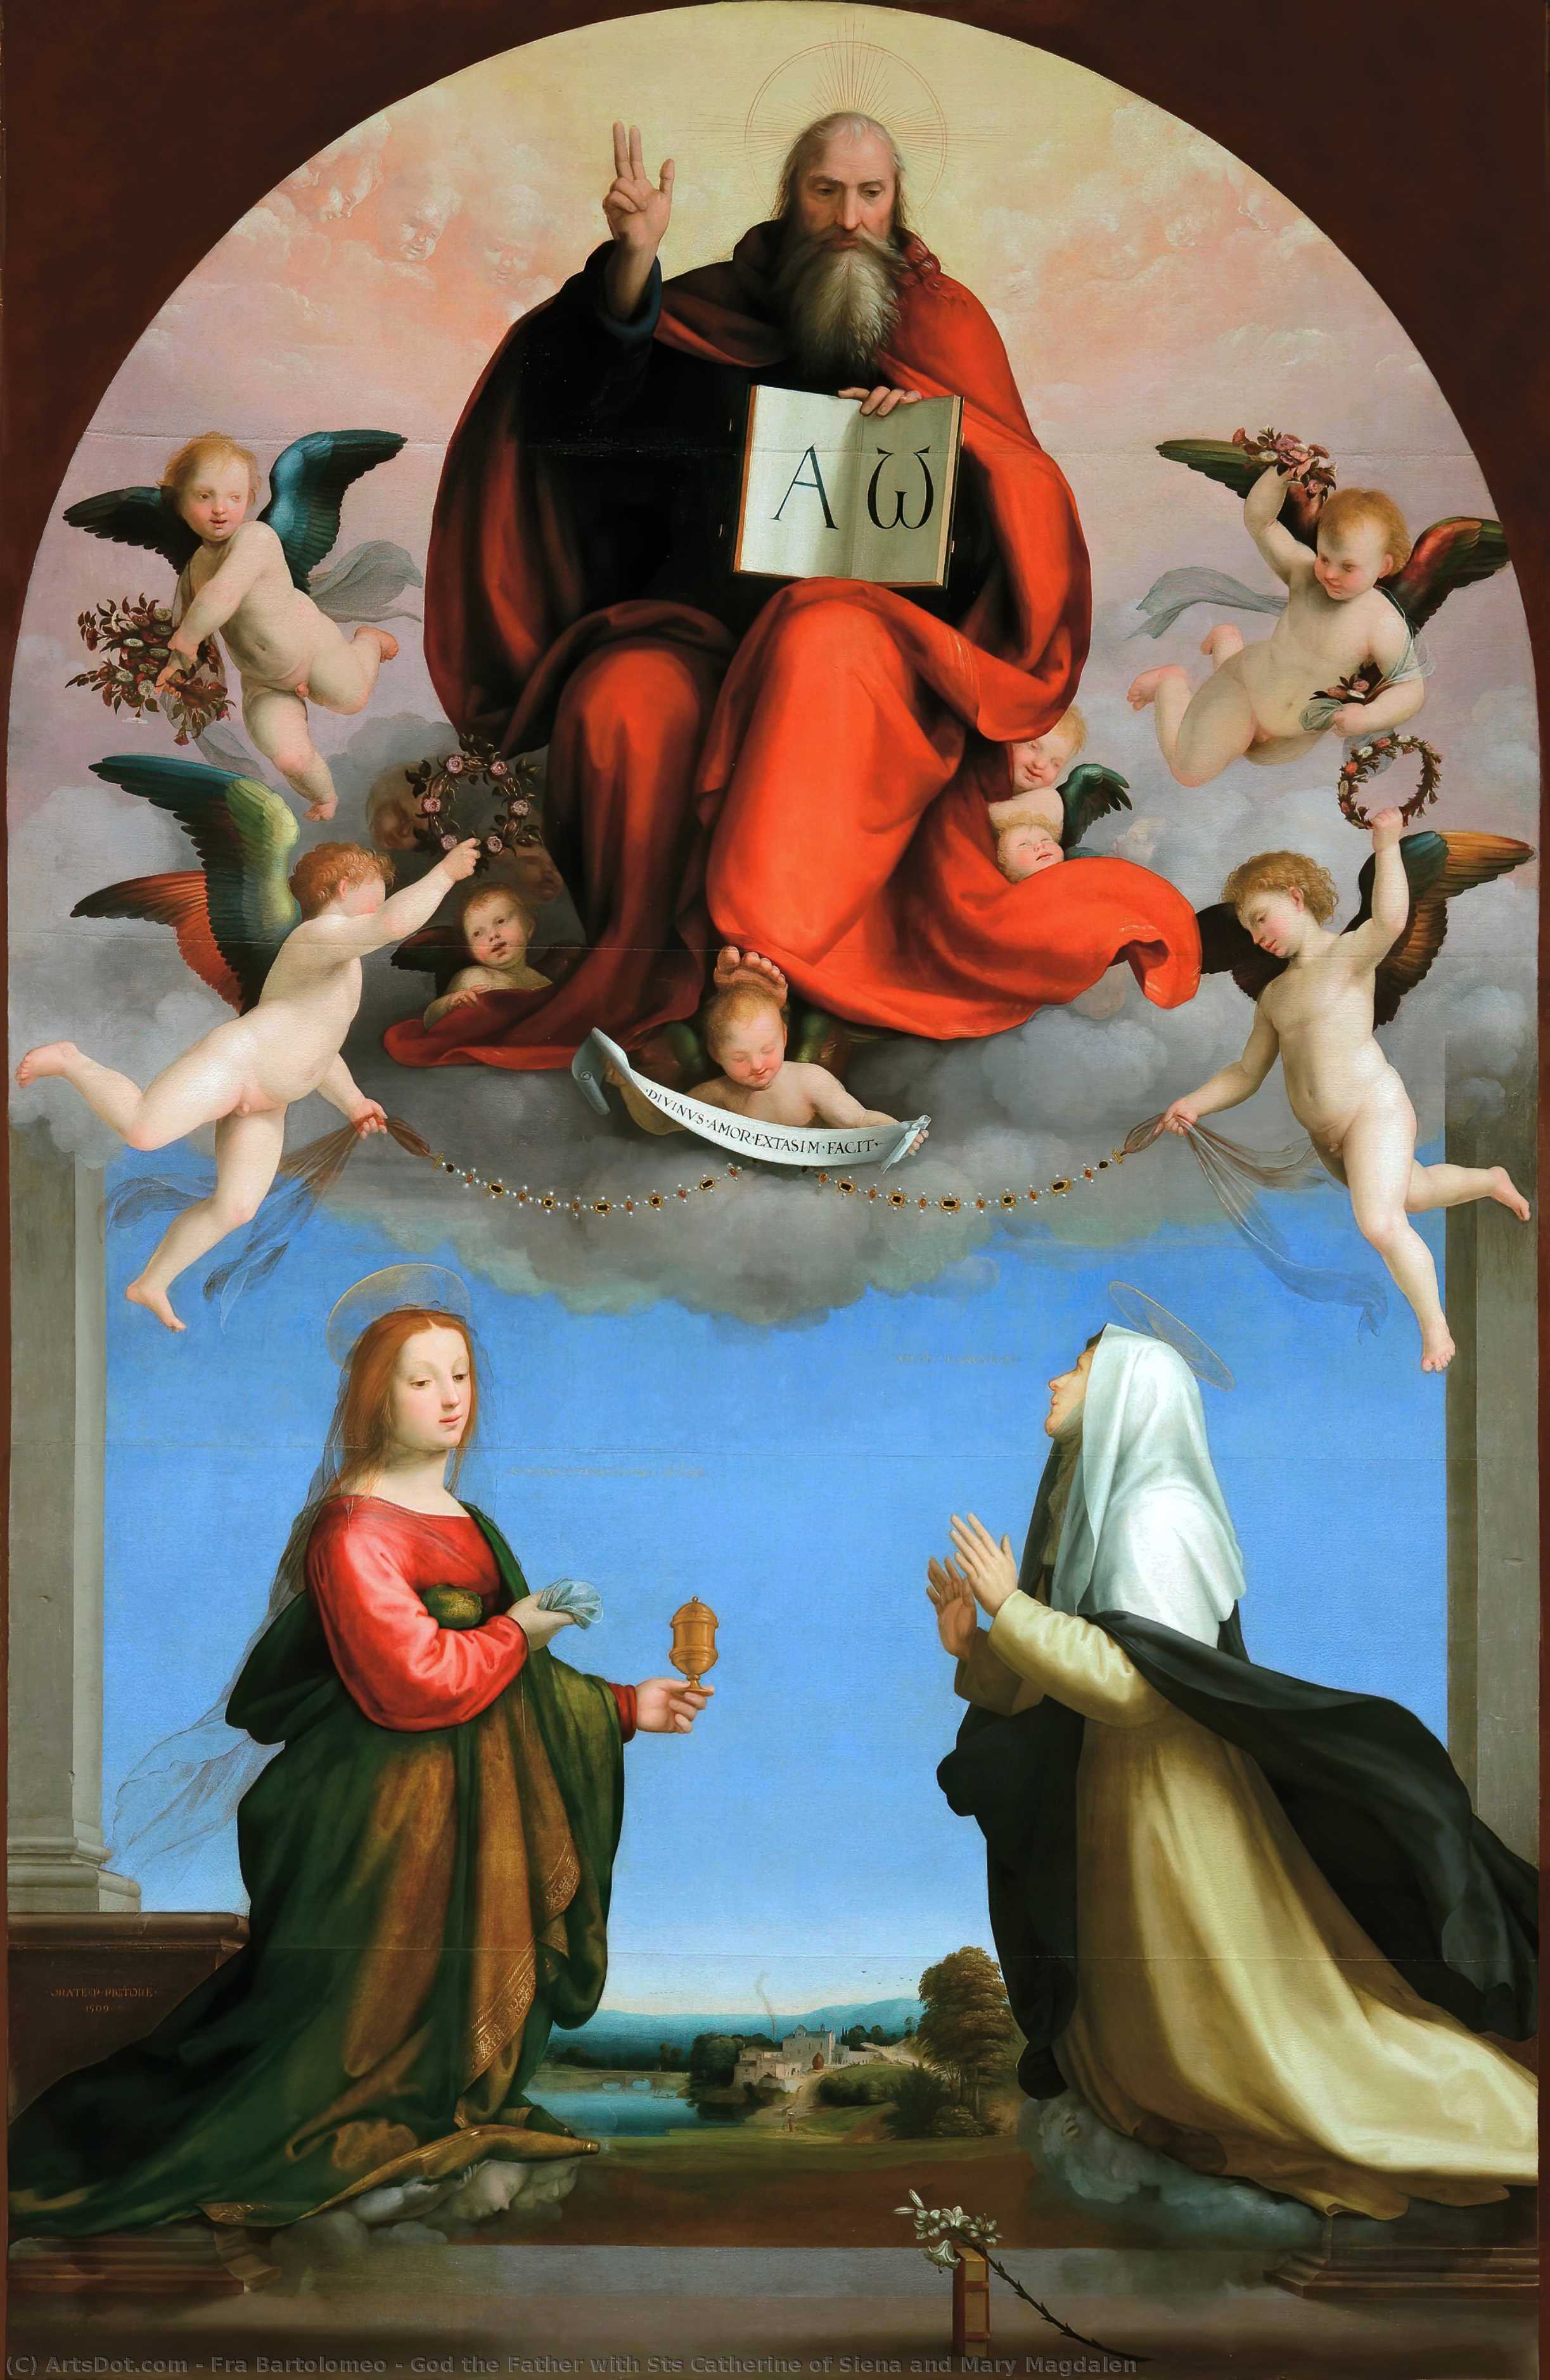 WikiOO.org - Güzel Sanatlar Ansiklopedisi - Resim, Resimler Fra Bartolomeo - God the Father with Sts Catherine of Siena and Mary Magdalen